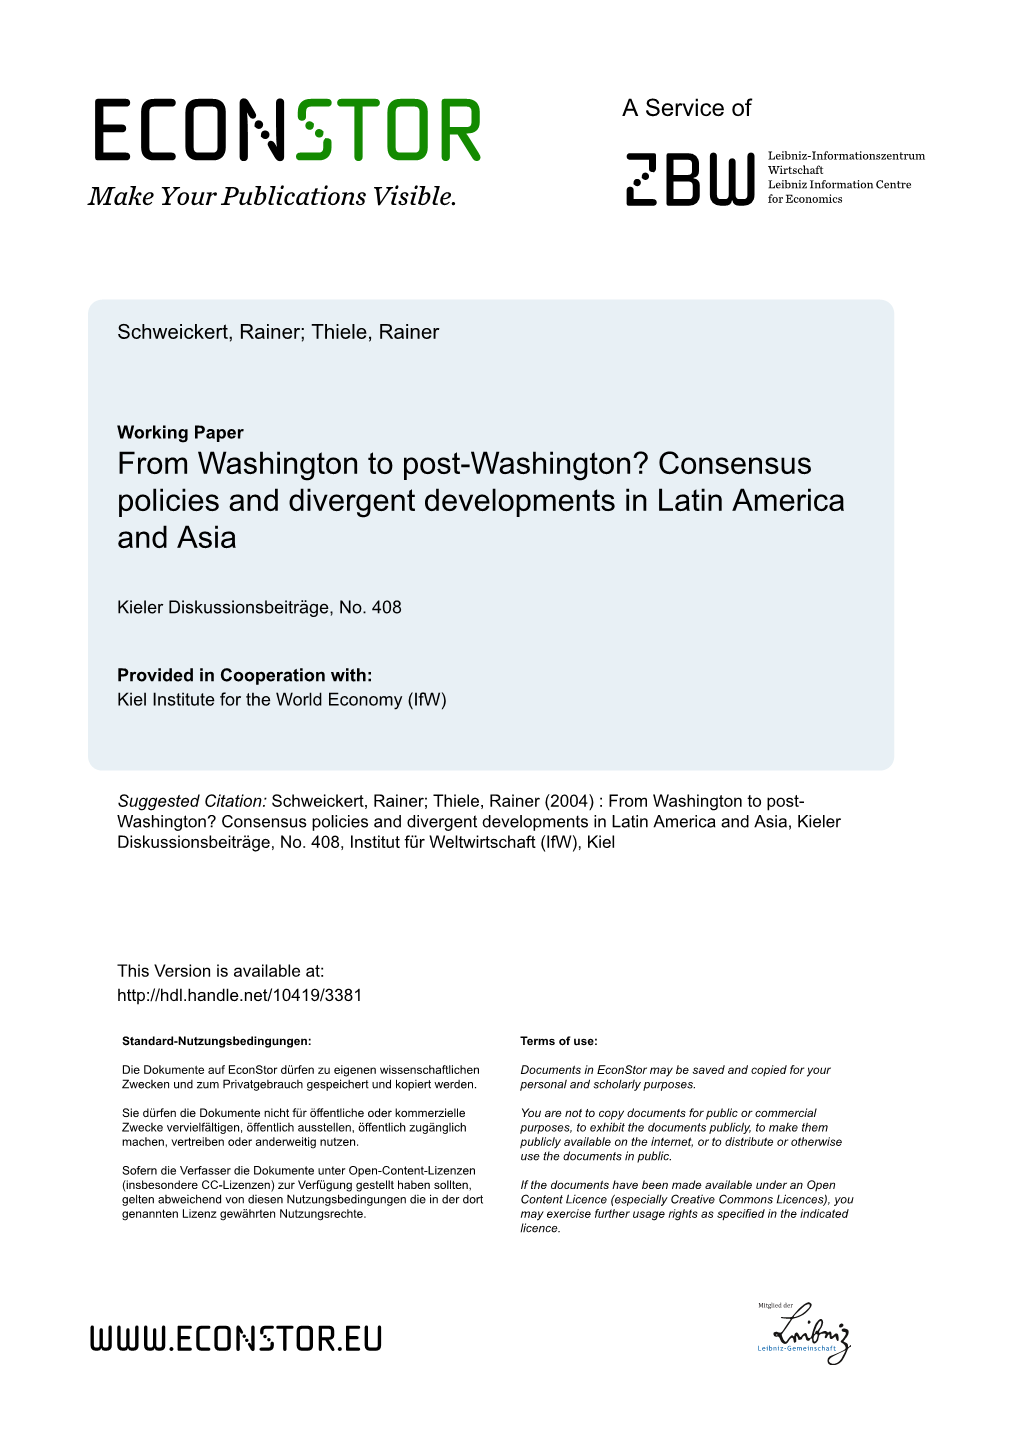 Consensus Policies and Divergent Developments in Latin America and Asia